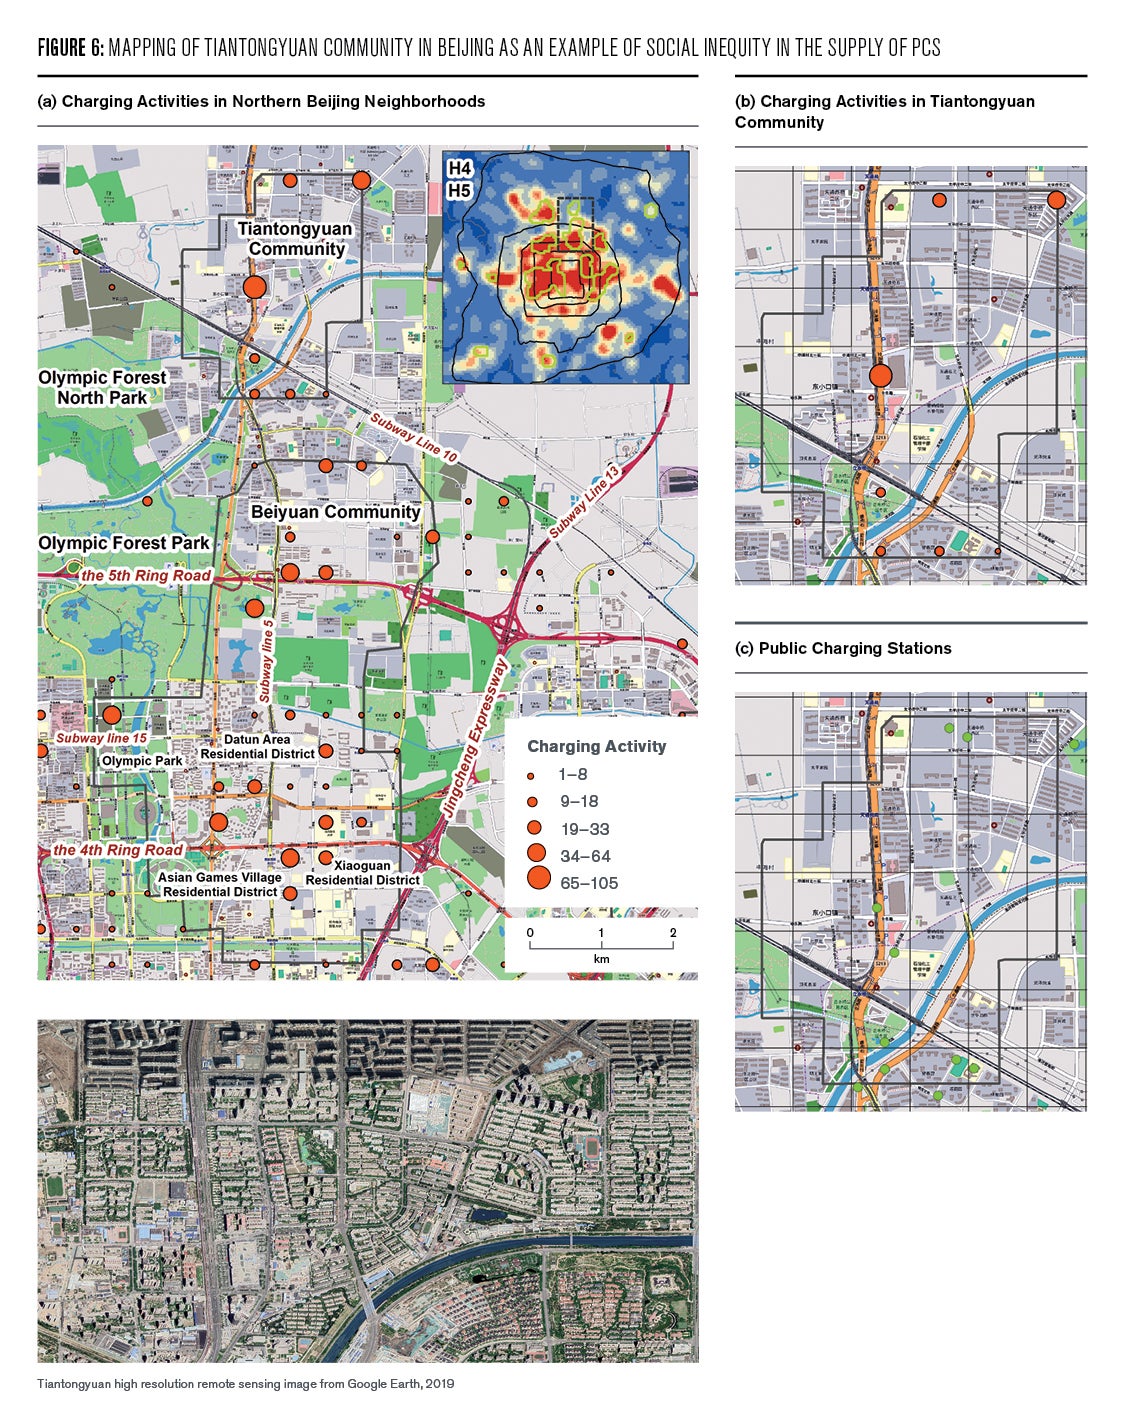 Figure 6: Mapping of Tiantongyuan community in Beijing as an example of social inequity in the supply of PCS